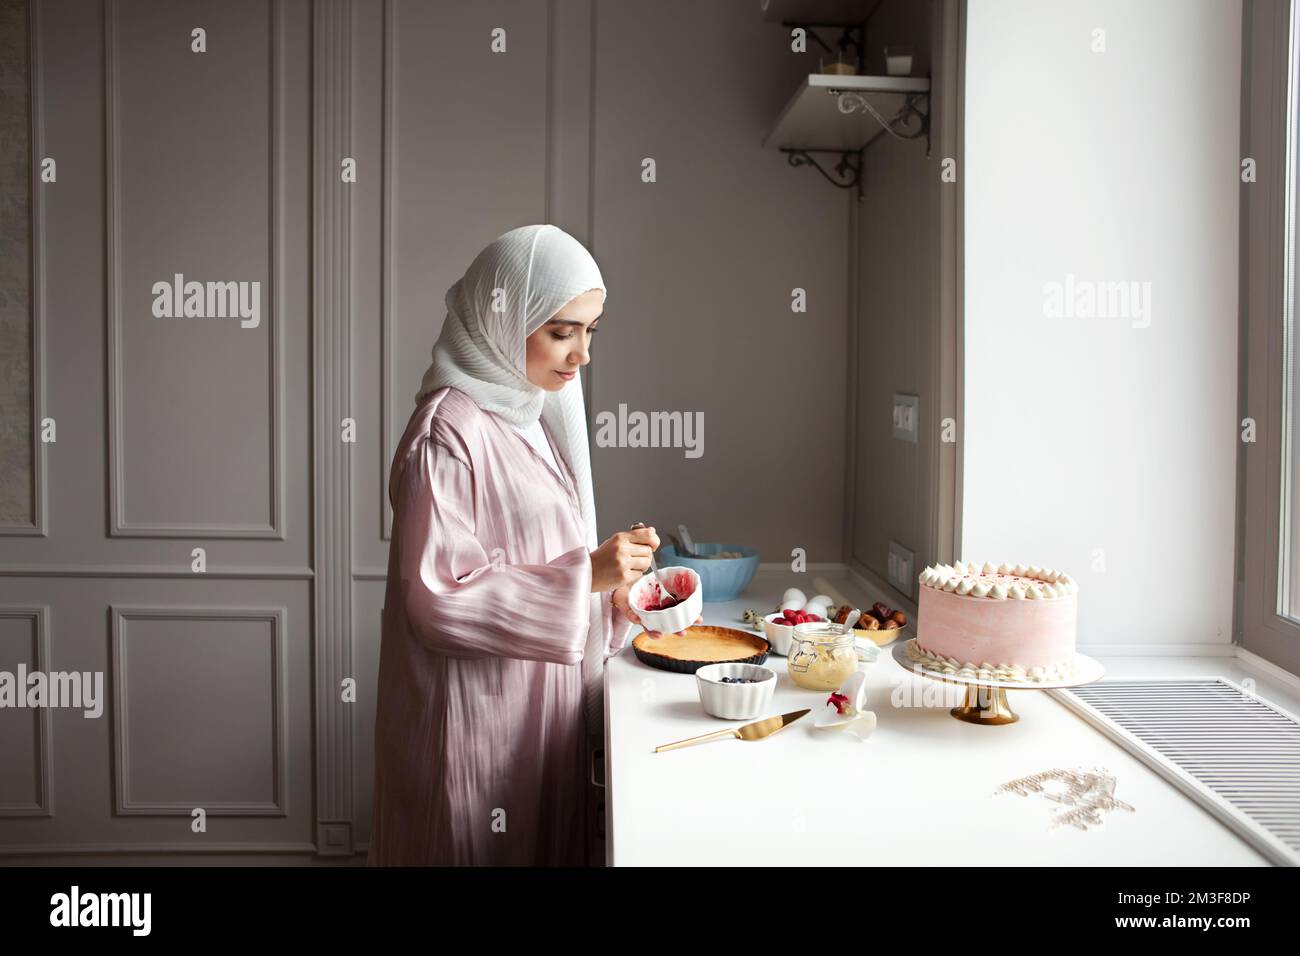 Muslim woman cooks dessert cake at home kitchen, arabian young model in hijab and abaya Stock Photo